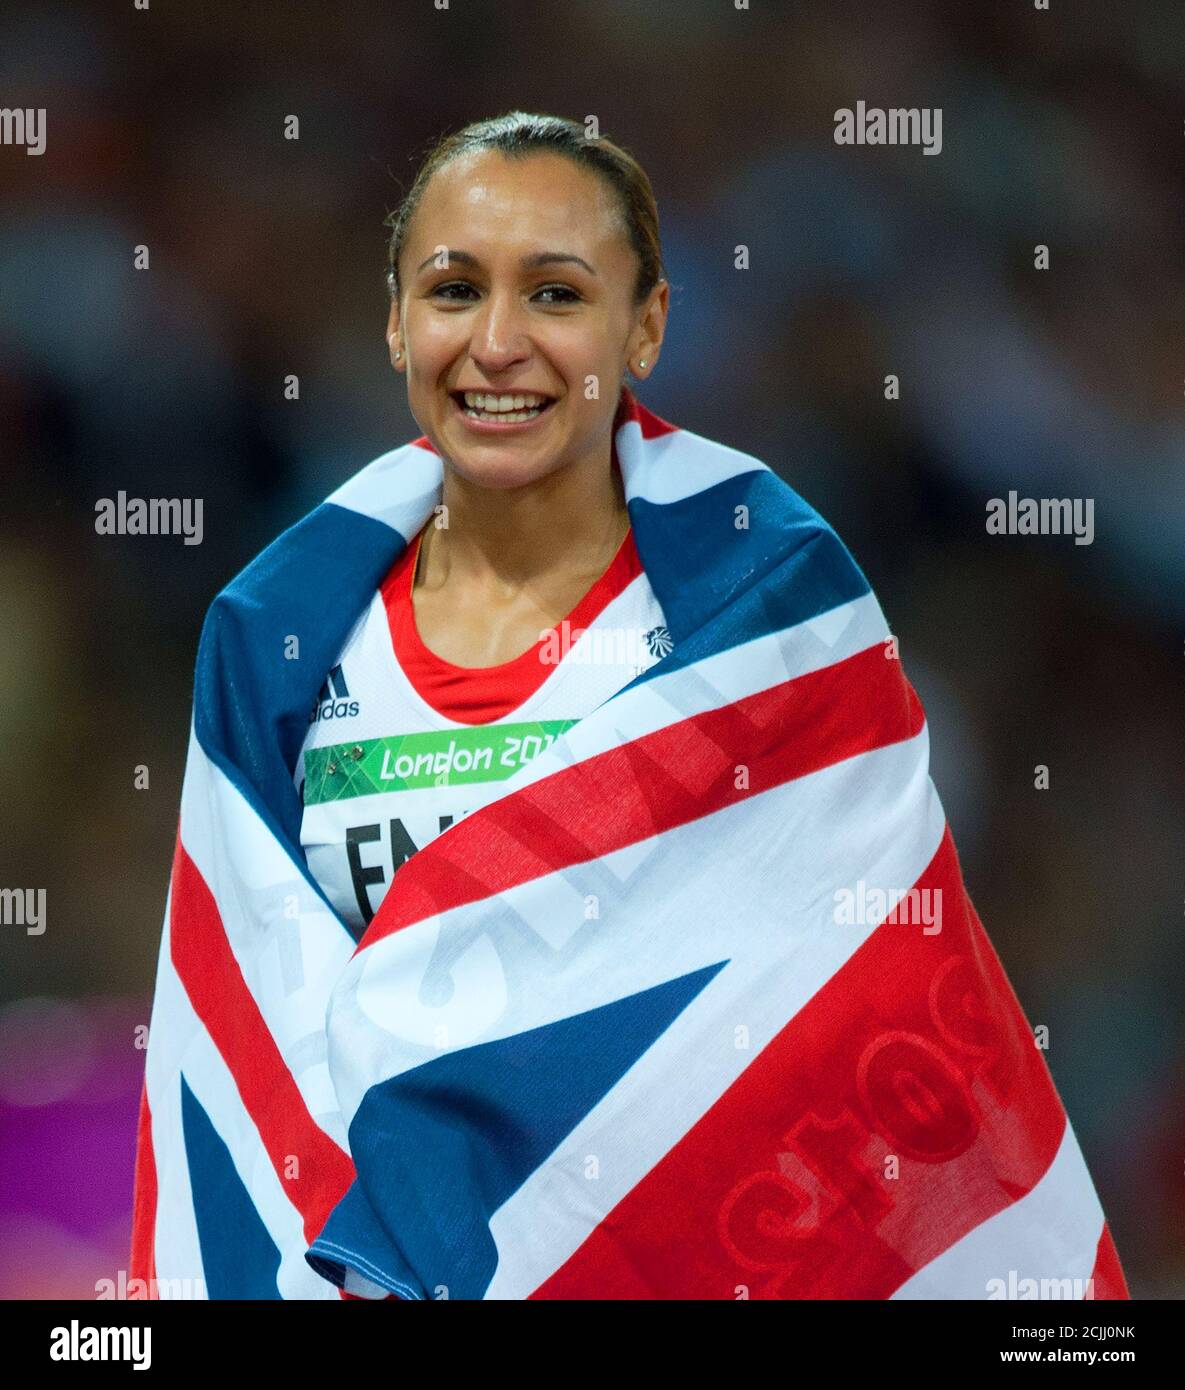 Jessica Ennis Of Great Britain Celebrates Winning The Gold Medal In The Women S Heptathalon 2012